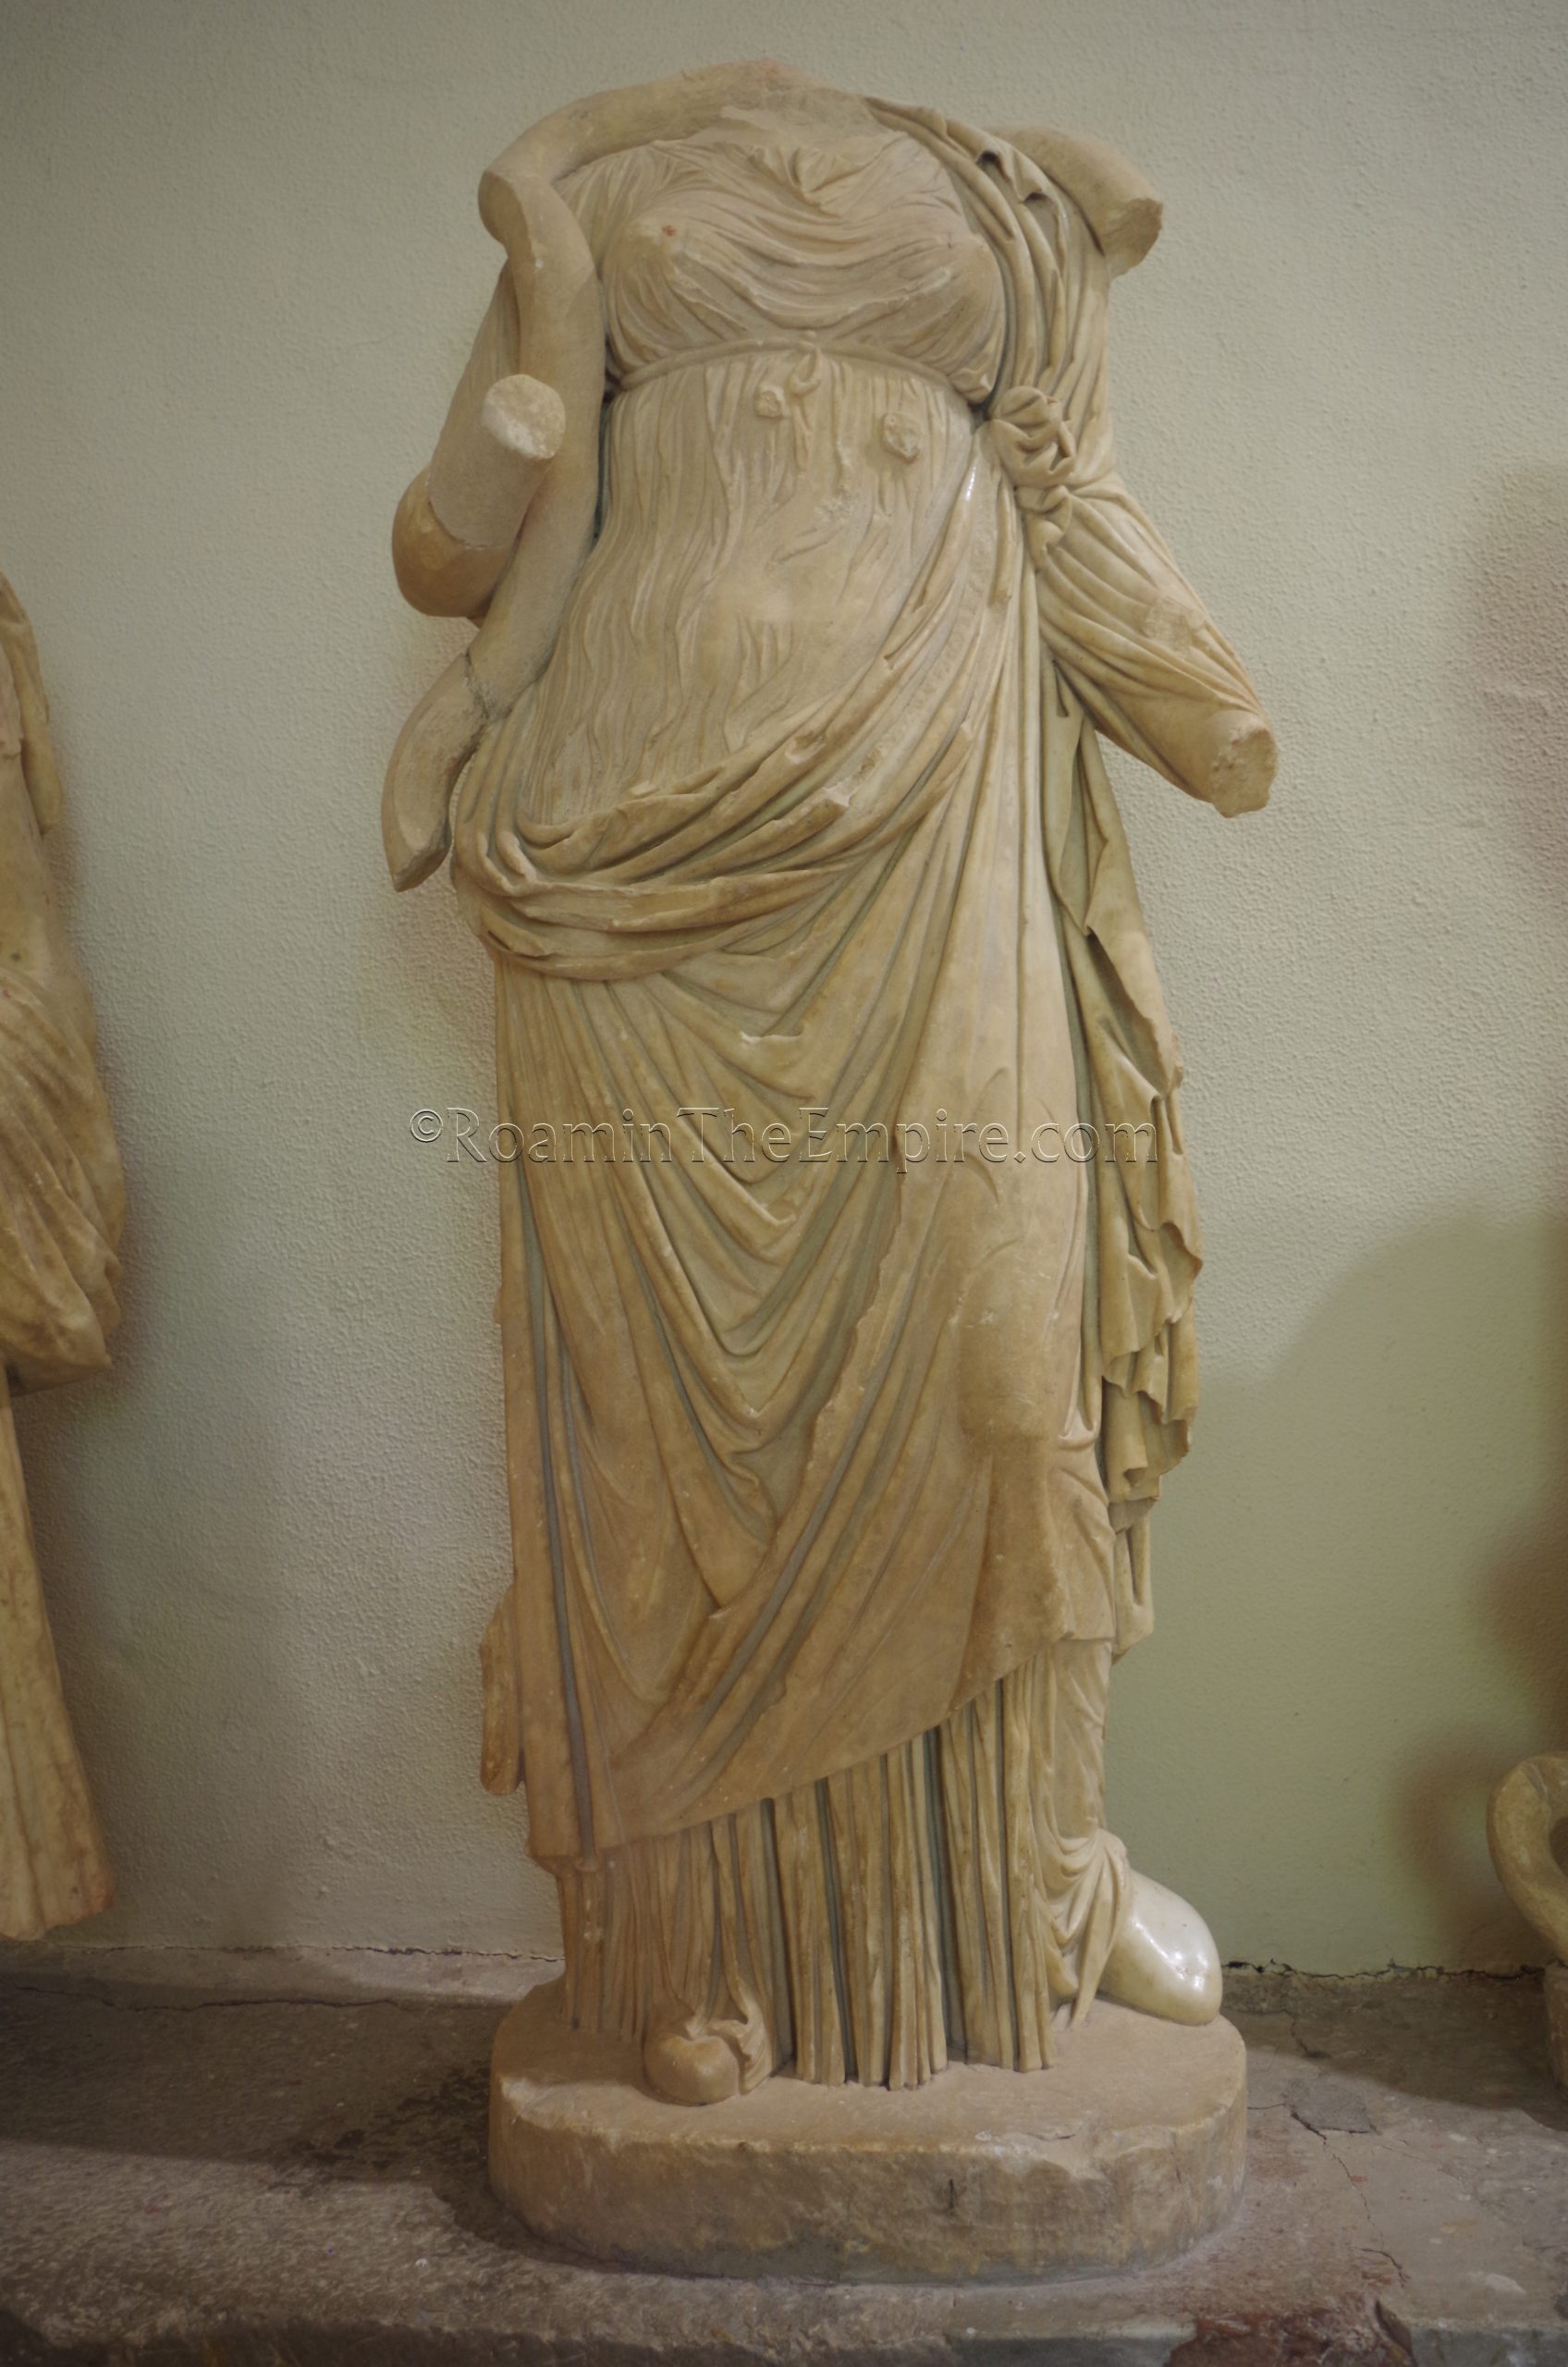 Statue of Hygeia from the Baths of Asclepius/library area. Dated to about 160 CE.